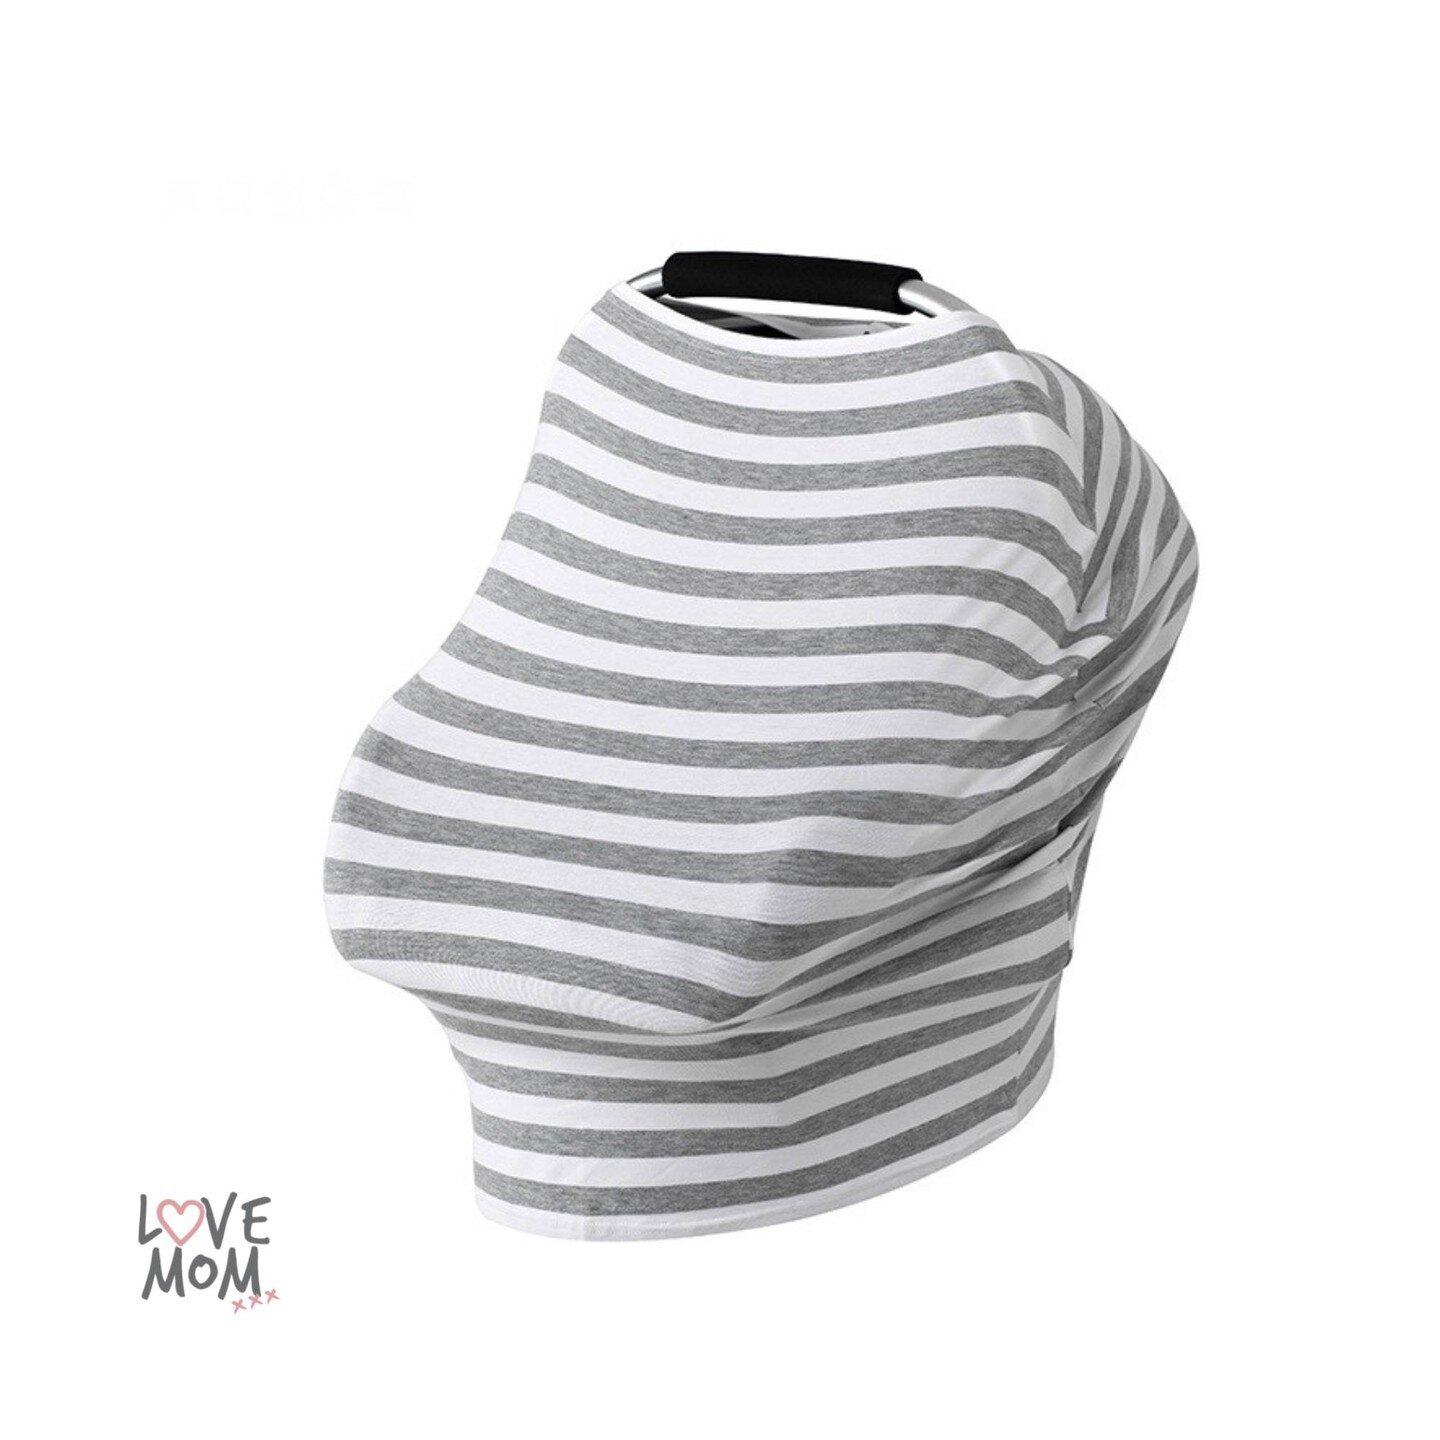 Our 5 in 1 multipurpose cover is a must have for all moms, this fashionable item can be used as a stylish scarf, breastfeeding cover, trolley seat overlay, to protect your high chair or shade you baby in their pram while they take a nap.⁠
⁠
- Love Mo